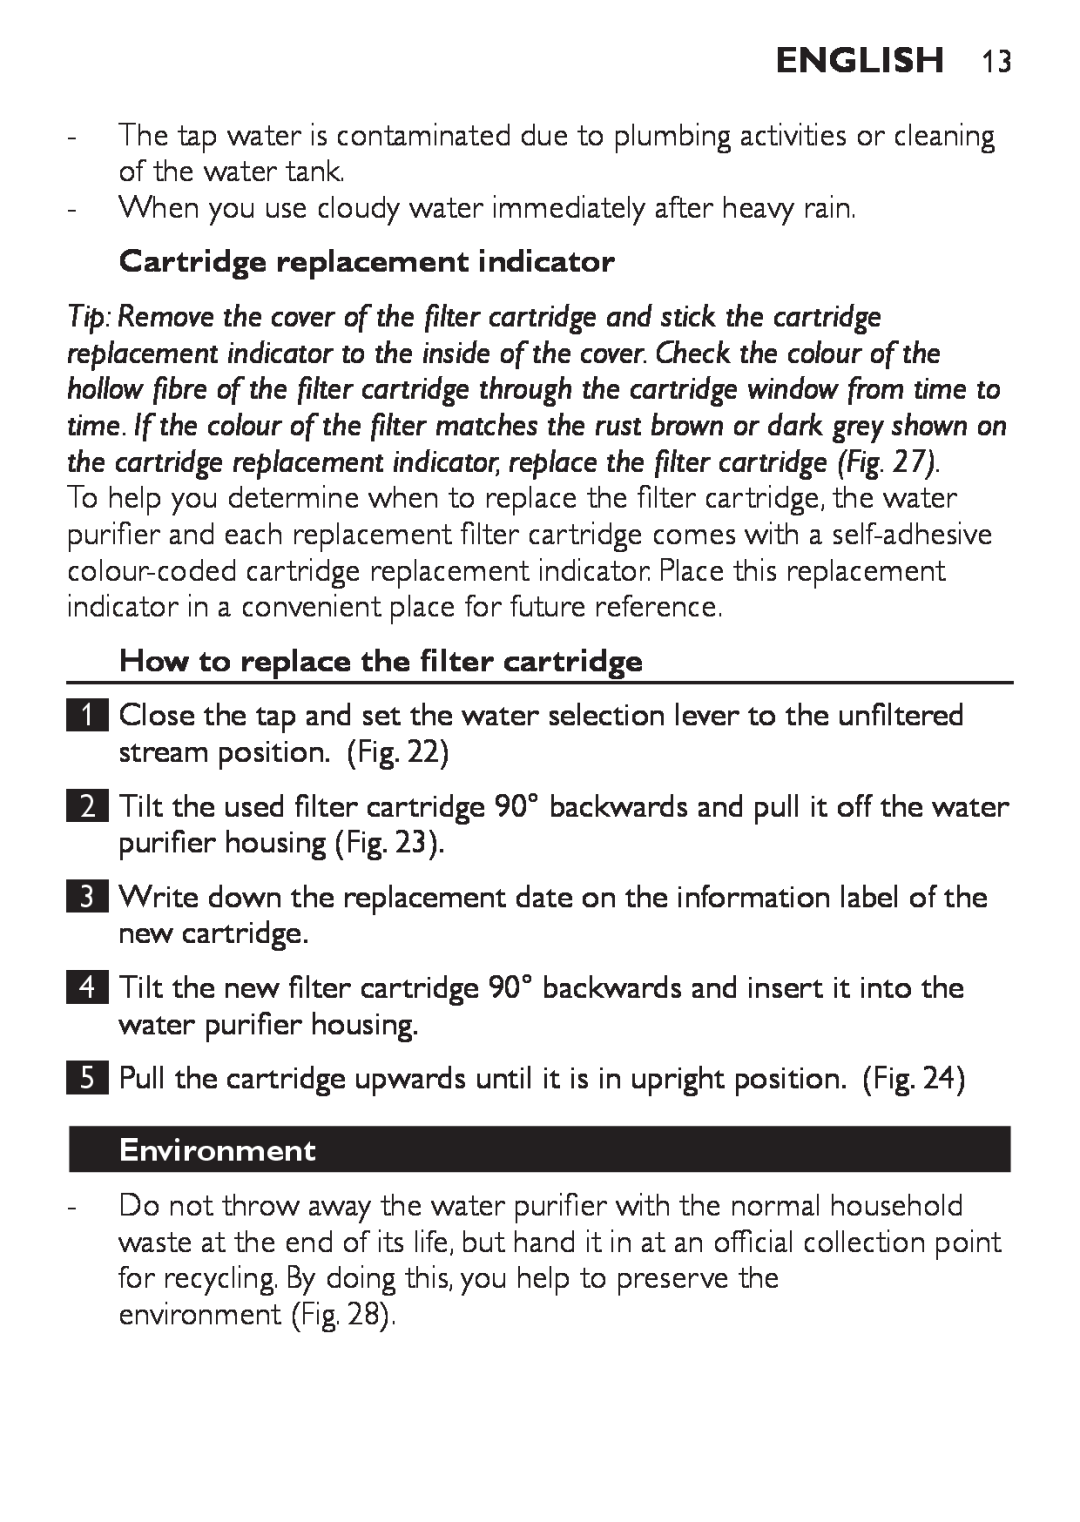 Philips WP3811, WP3810 manual Cartridge replacement indicator, How to replace the filter cartridge, Environment, English 